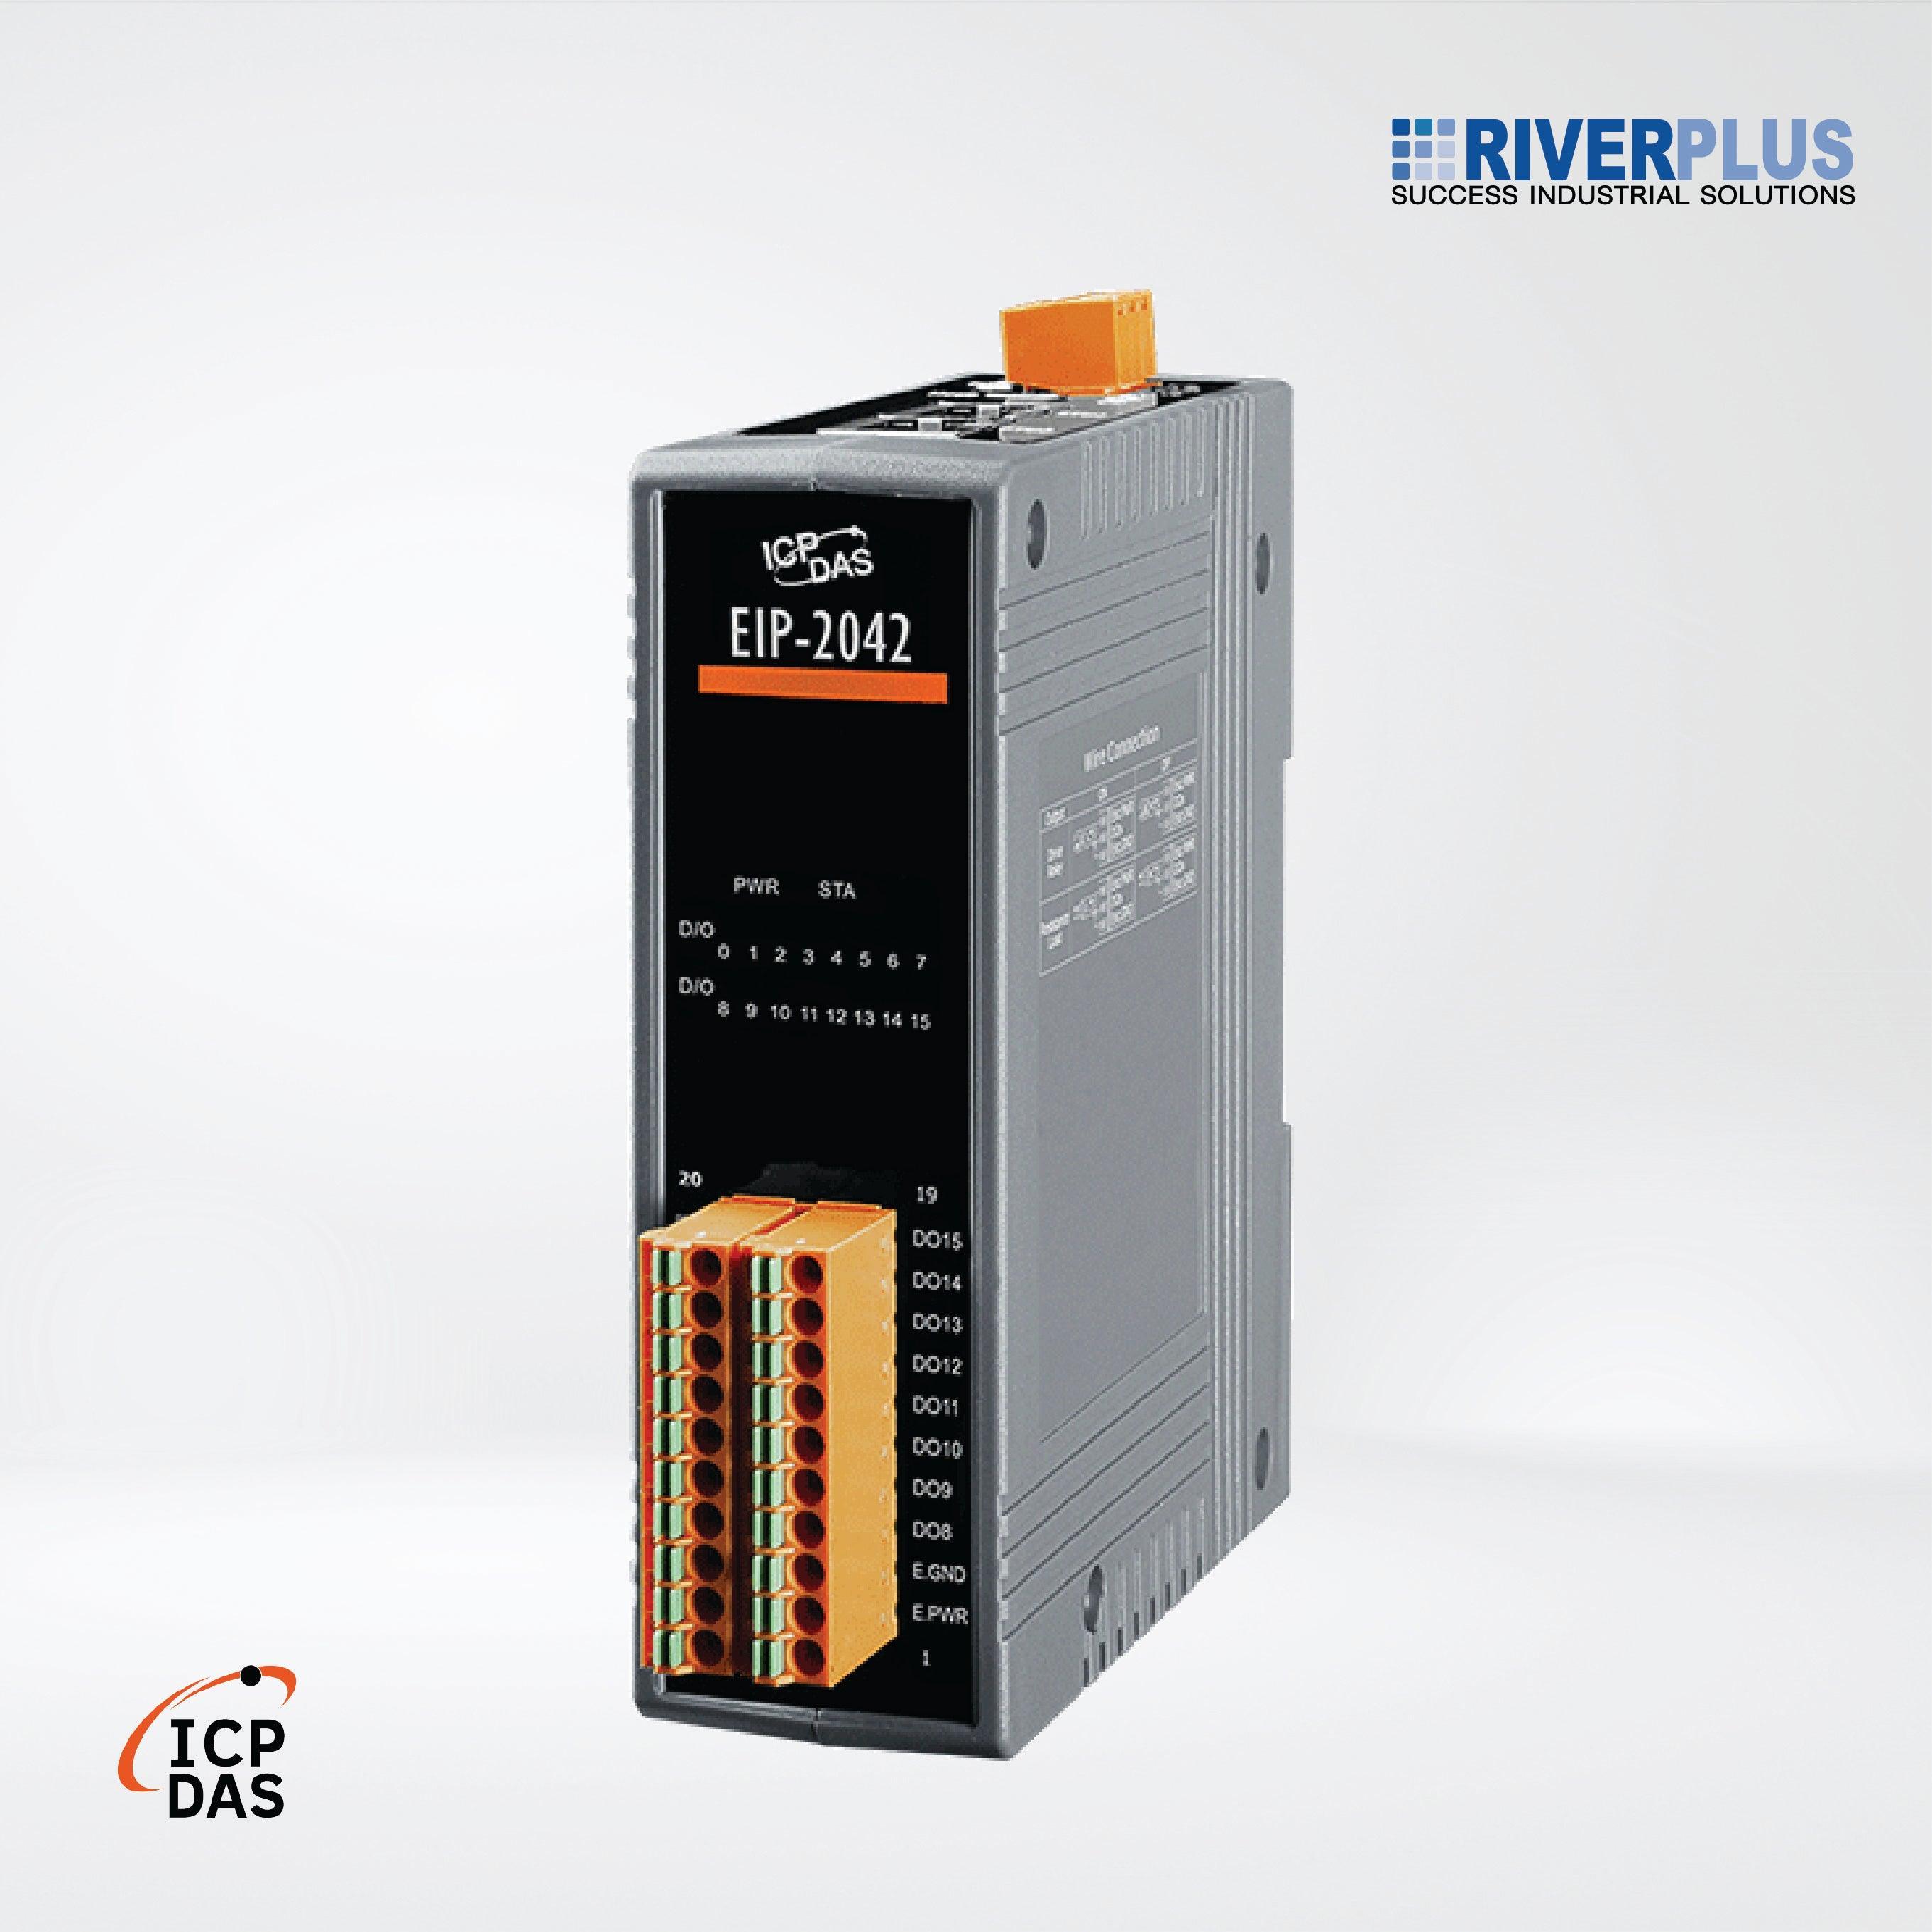 EIP-2042 EtherNet/IP Module (Isolated 16-ch DO) - Riverplus